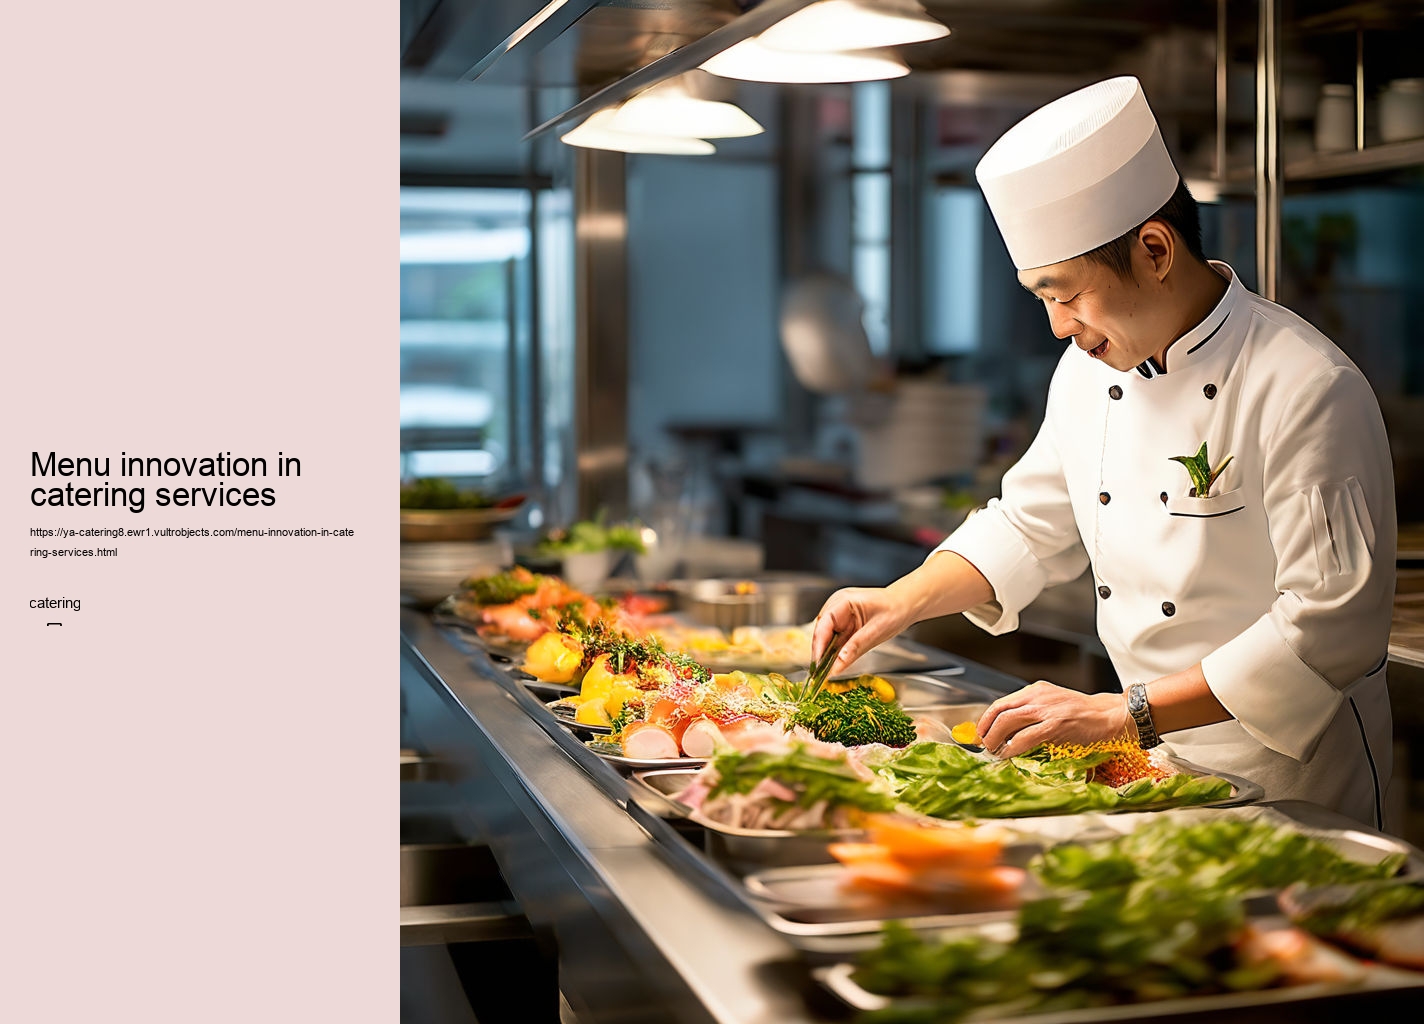 Menu innovation in catering services